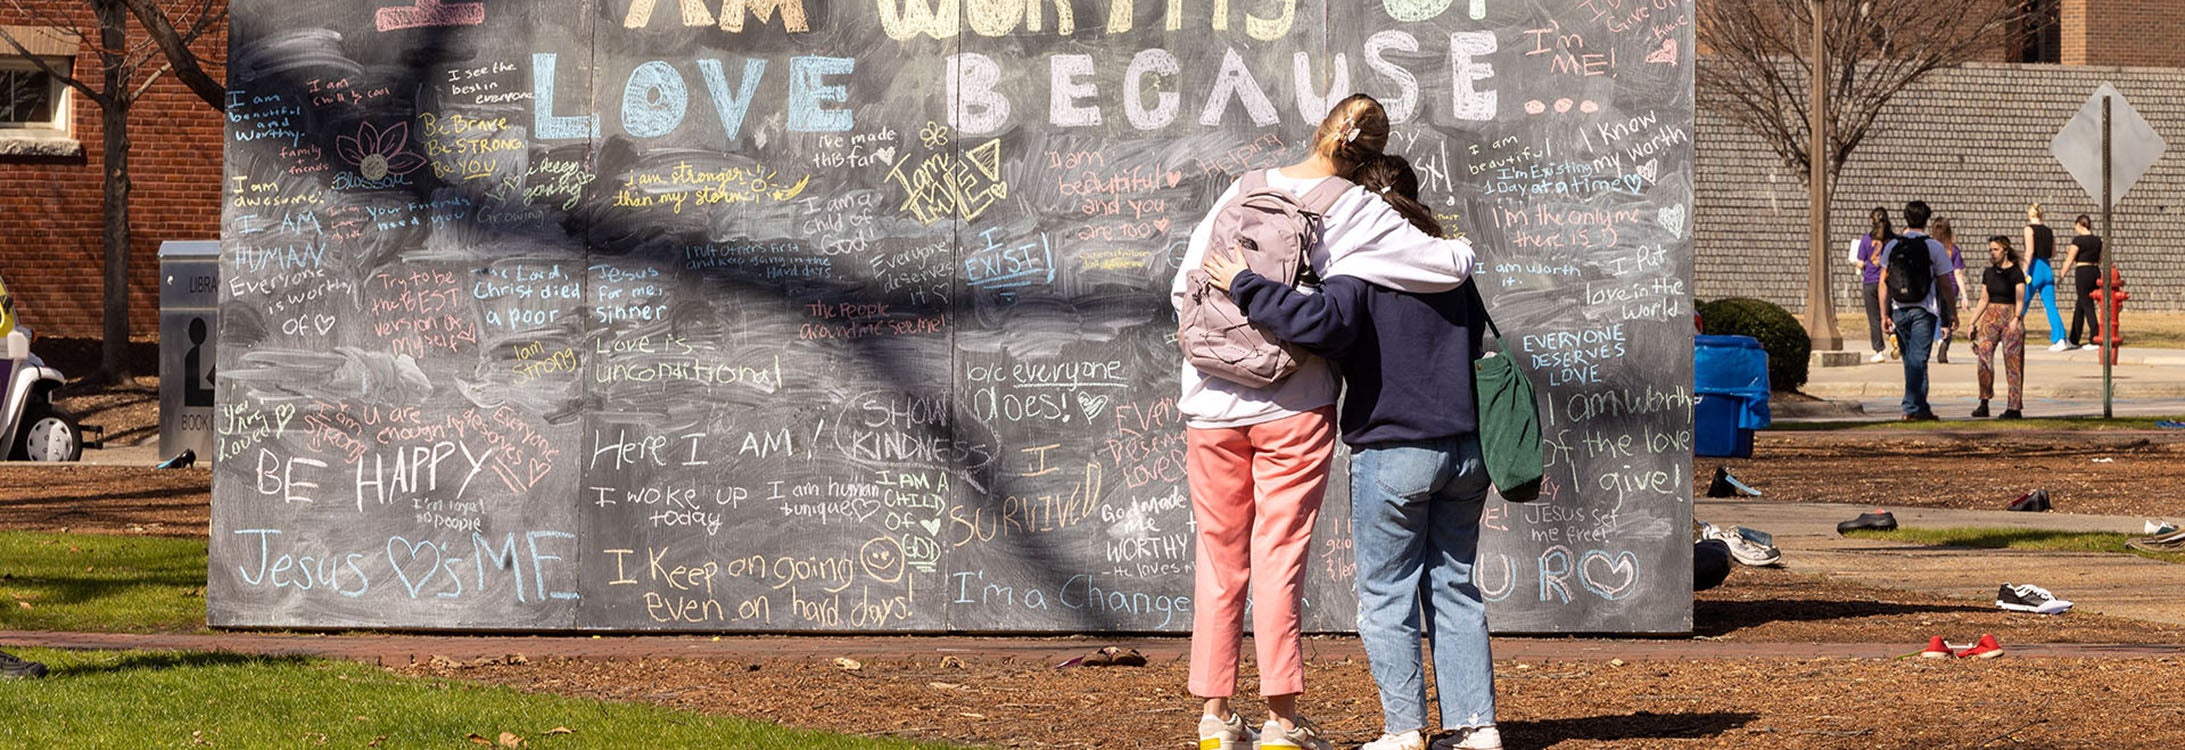 East Carolina University students look at a chalkboard of messages during a mental health awareness event in February.